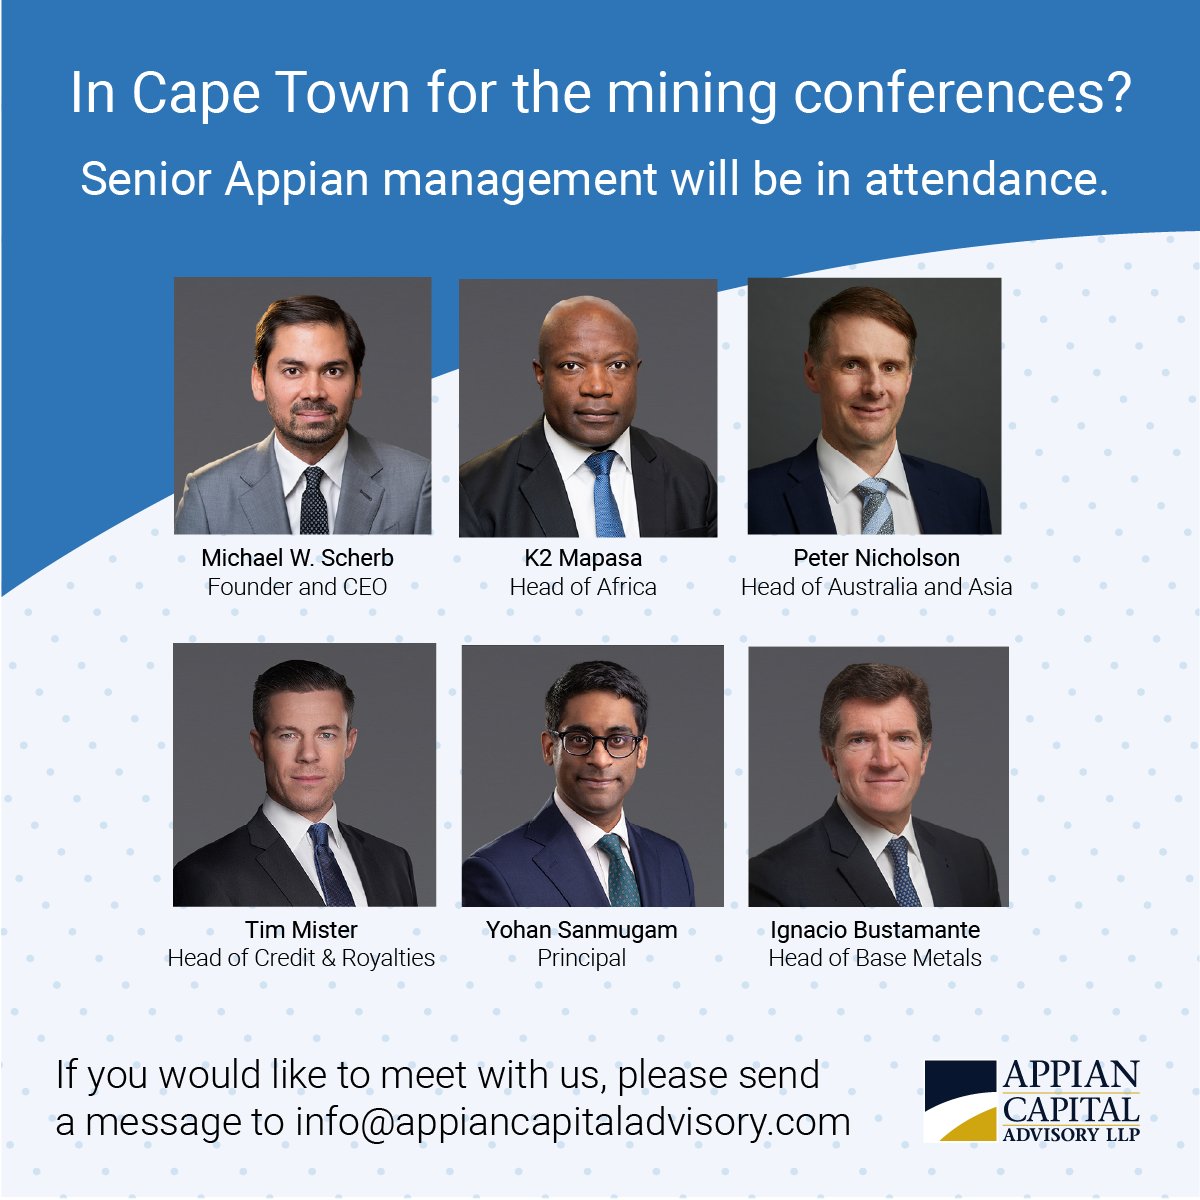 Interested in a chat with some of our key decision makers? Then send us an email ASAP as there is limited availability. #capetown #conference #Mining